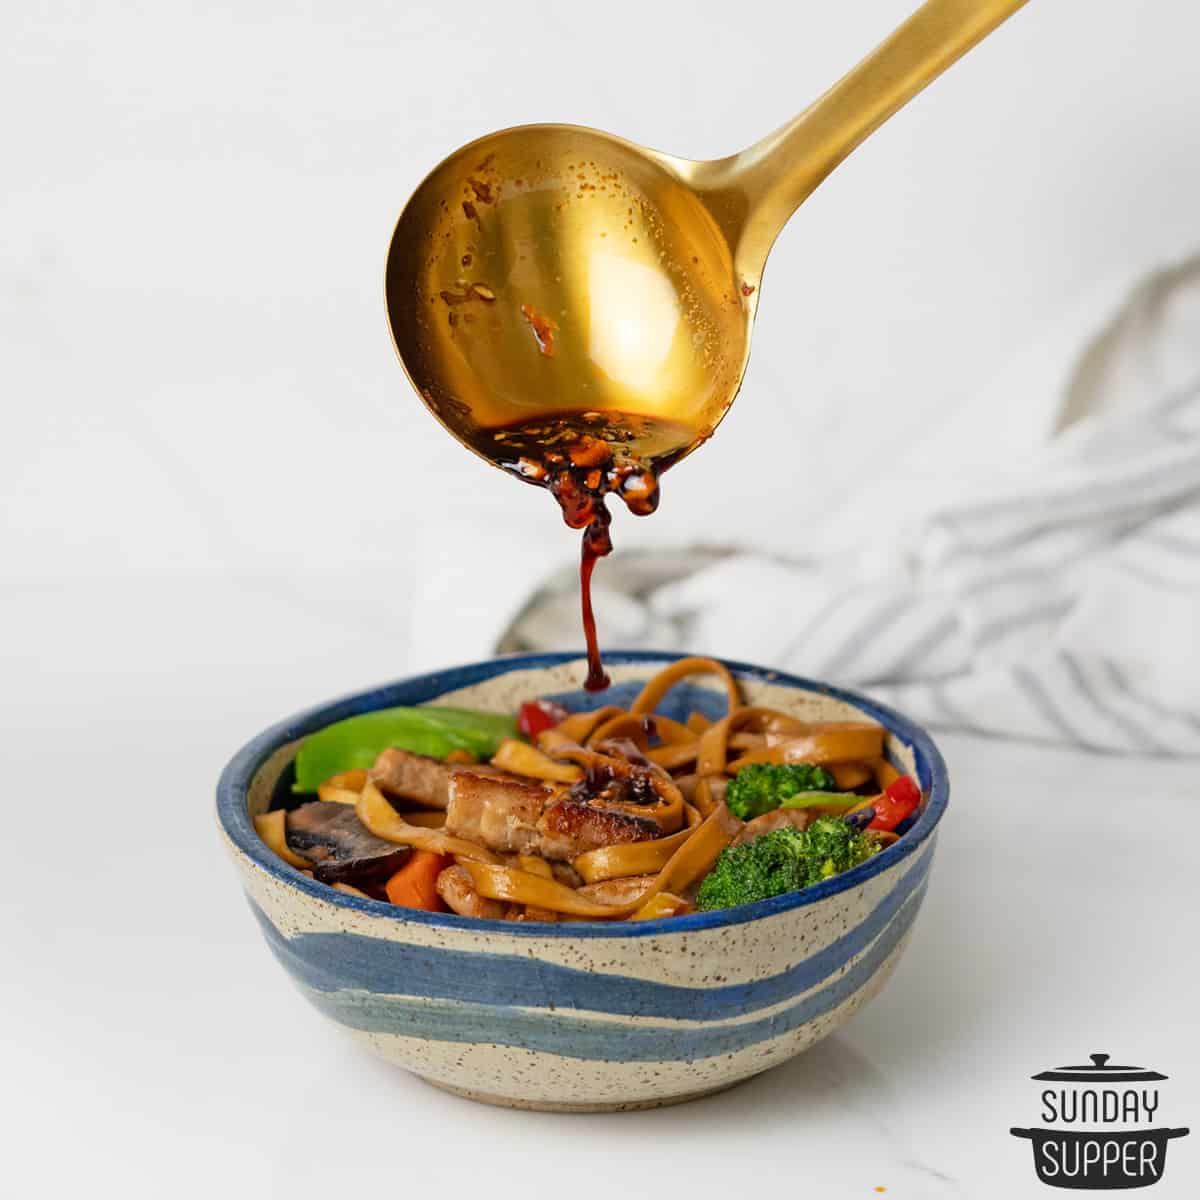 drizzling teriyaki sauce over a bowl of noodle stir-fry